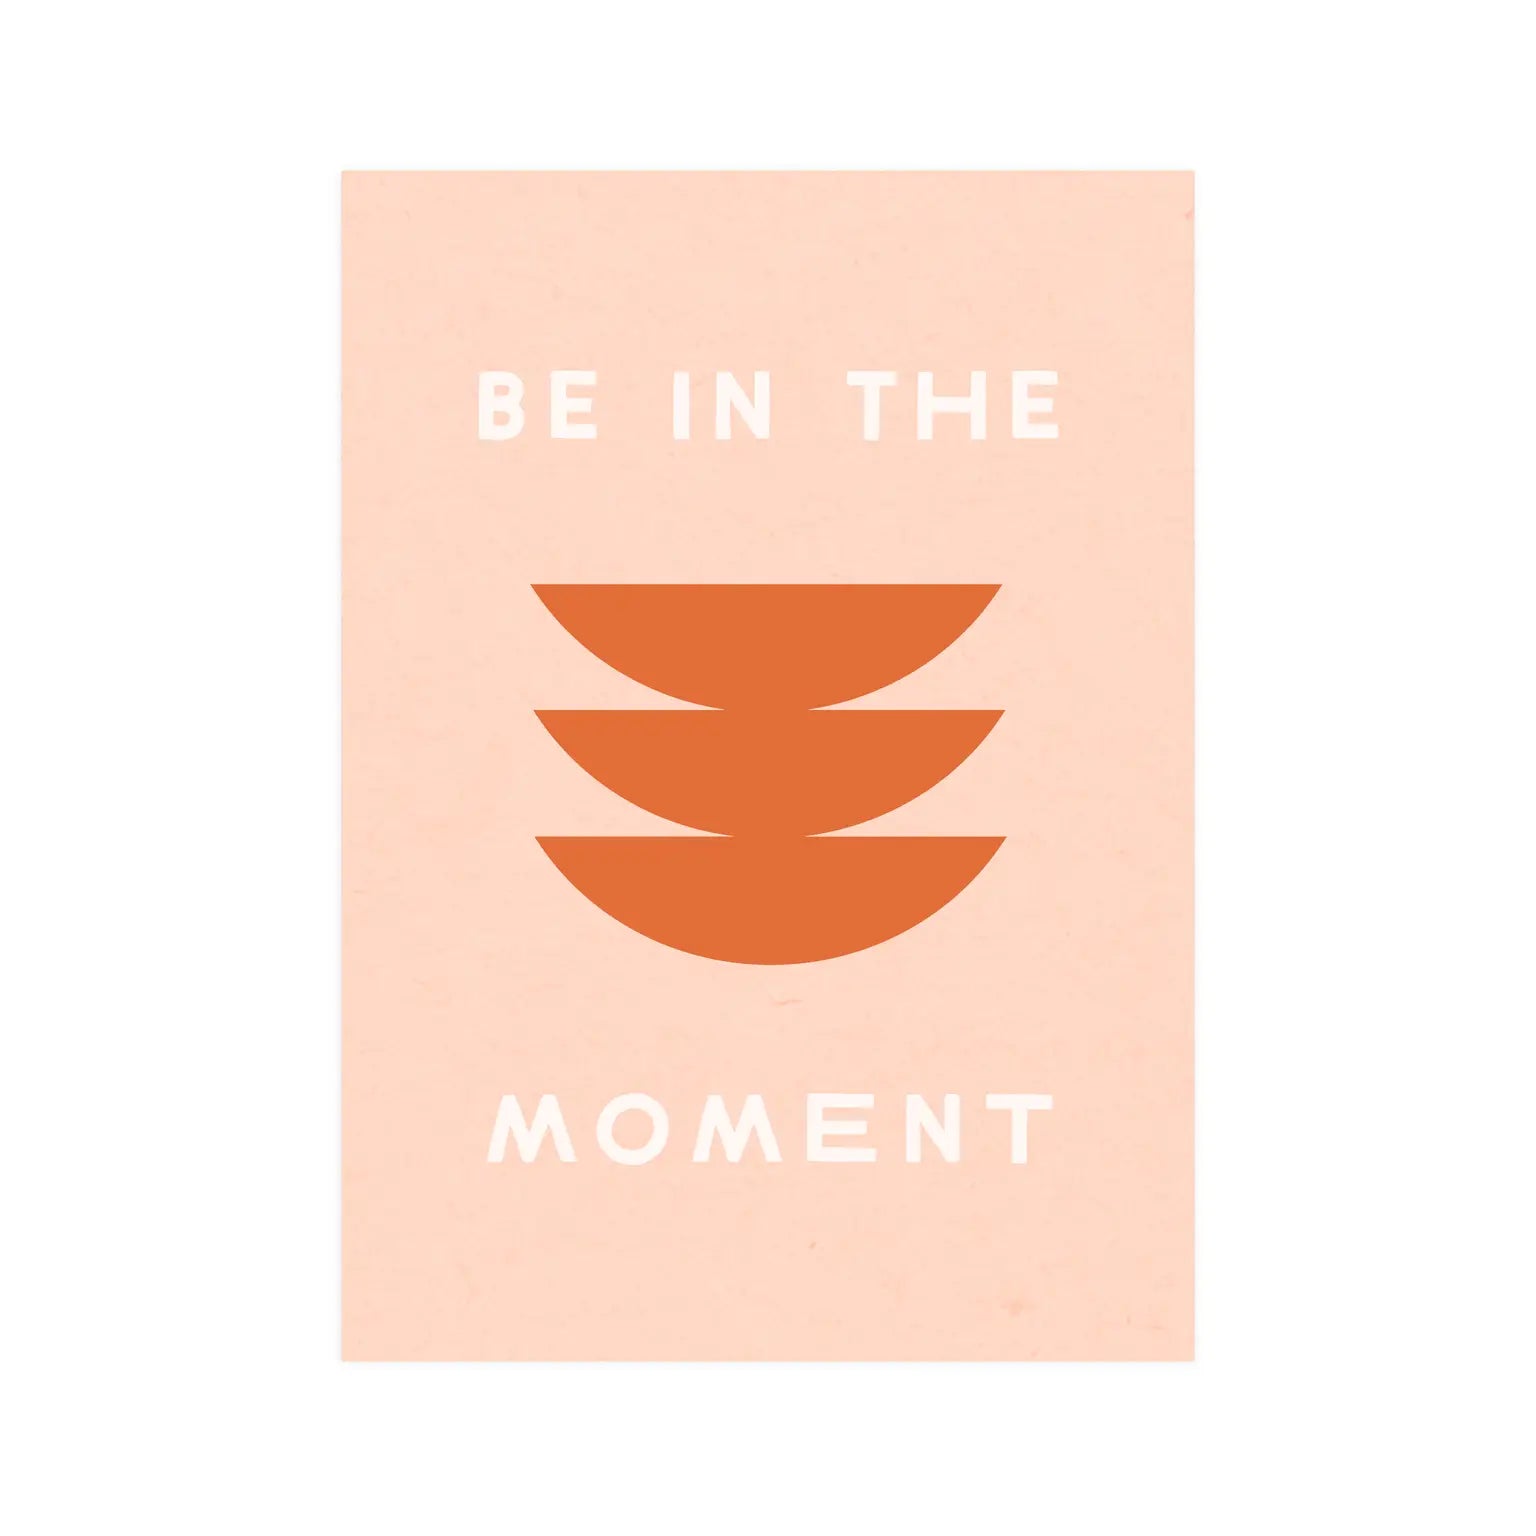 Pink background with abstract red shapes. White text reads "Be in the moment" 